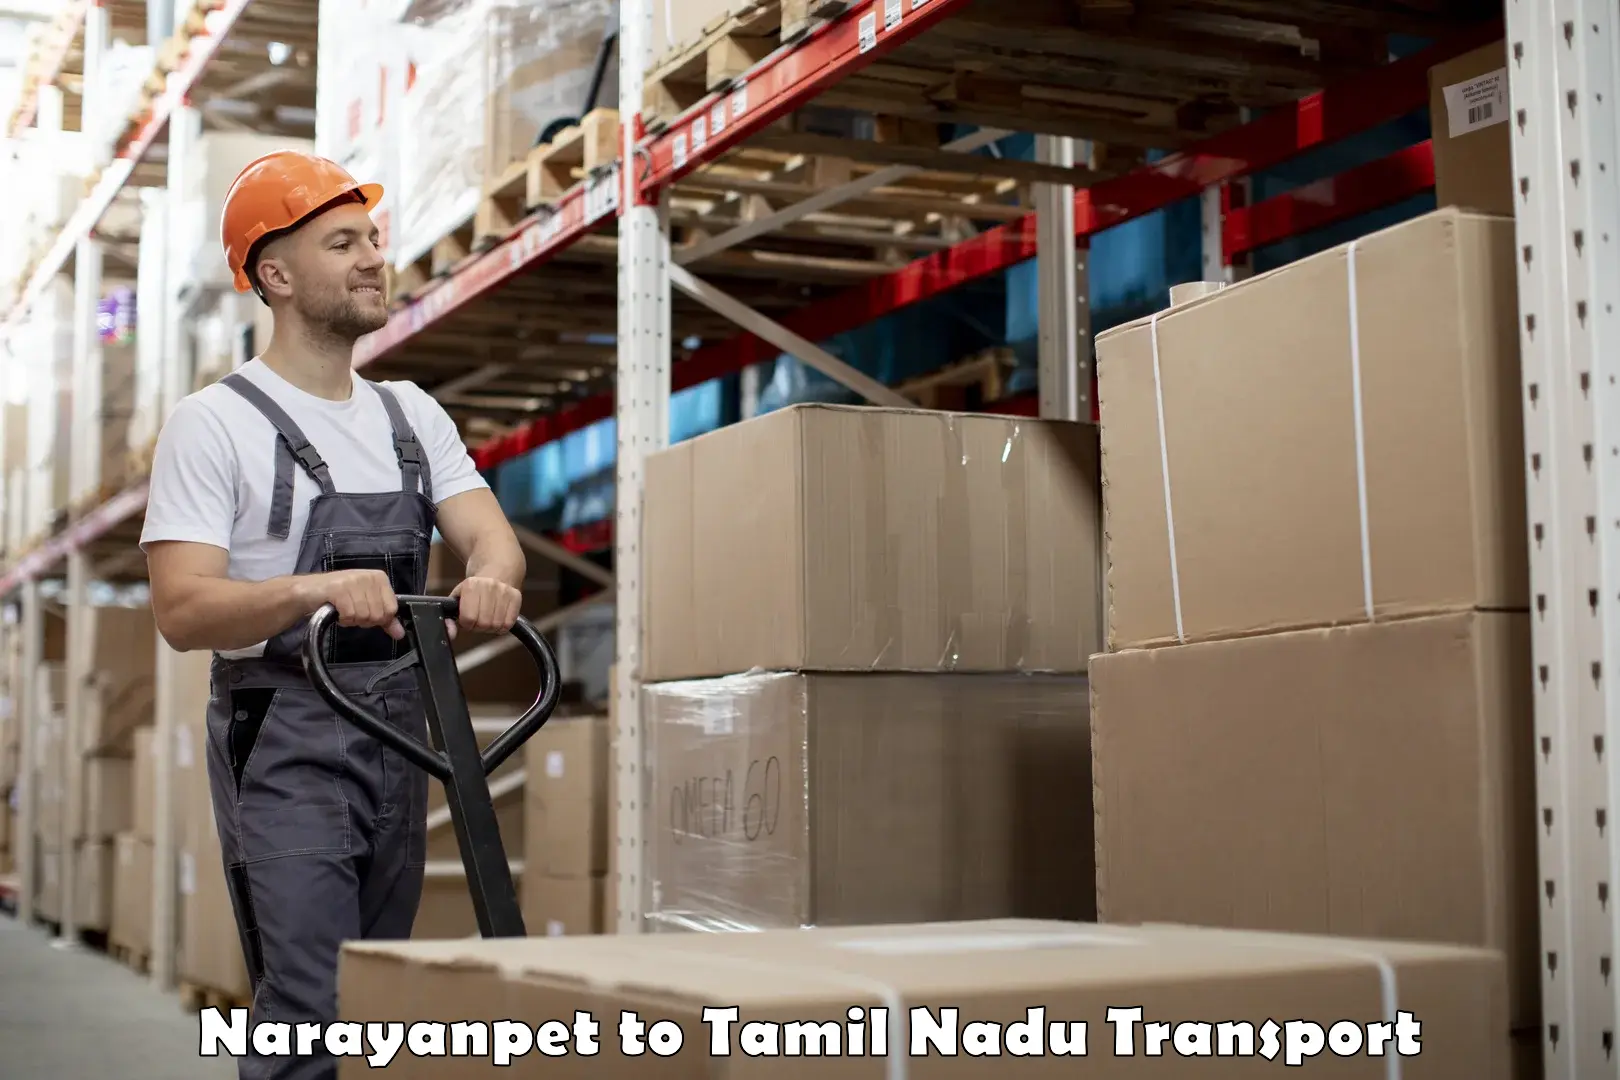 Container transportation services Narayanpet to Shanmugha Arts Science Technology and Research Academy Thanjavur